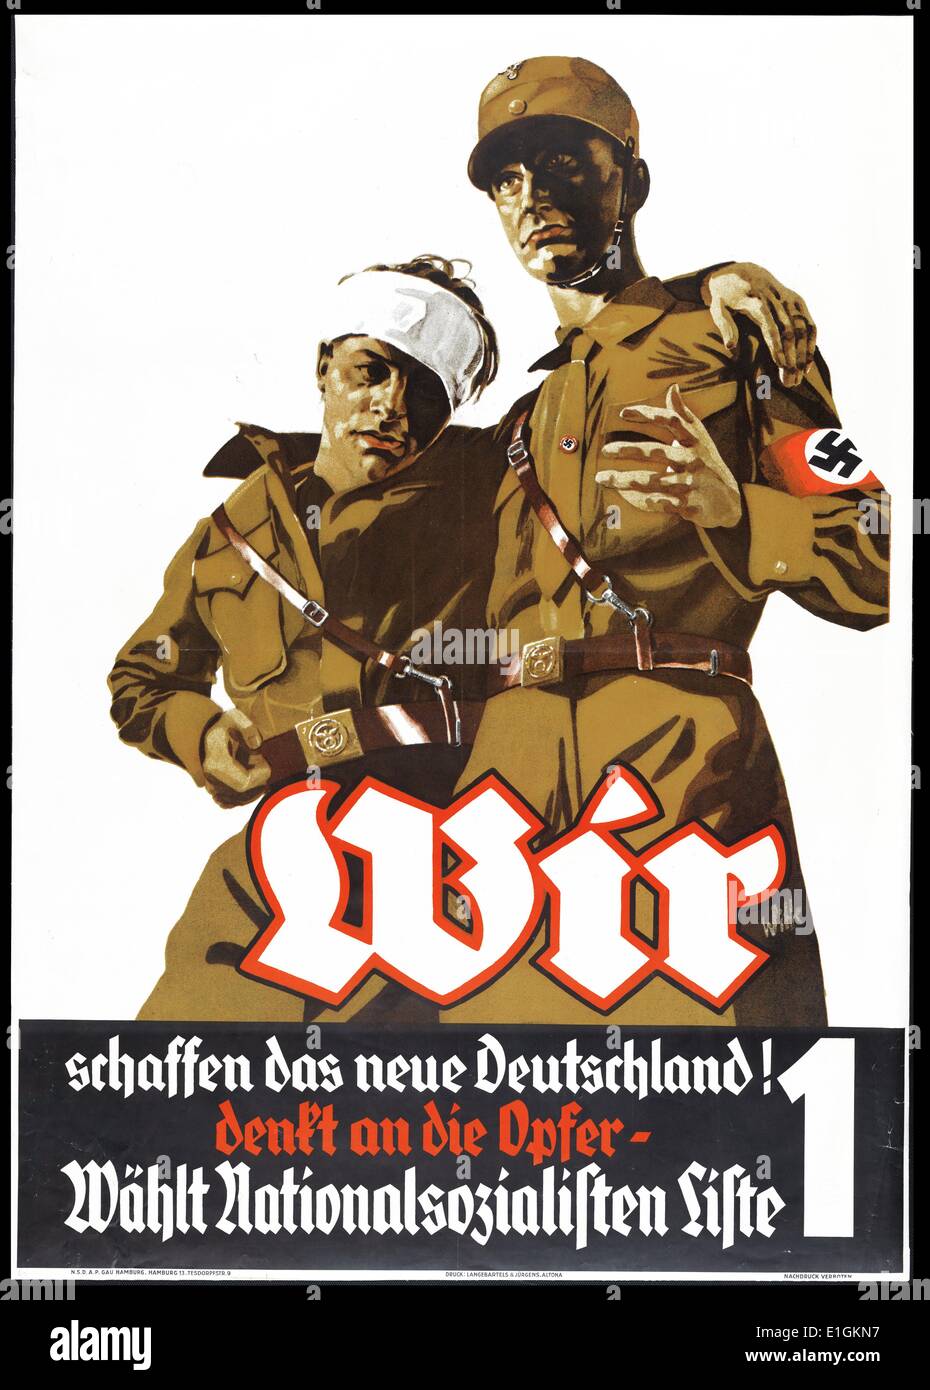 Wir schaffen das neue Deutschland! Denkt an die Opfer-wählt Nationalsozialisten Liste 1. Propaganda poster announcing political campaign for the Nazi party in Germany, showing two soldiers, one with a bandage around his head. The poster states that the National Socialists are creating a new Germany, making sacrifices, and asks voters to choose the Nationalsozialistische Deutsche Arbeiter-Partei, number 1 on the list. Stock Photo